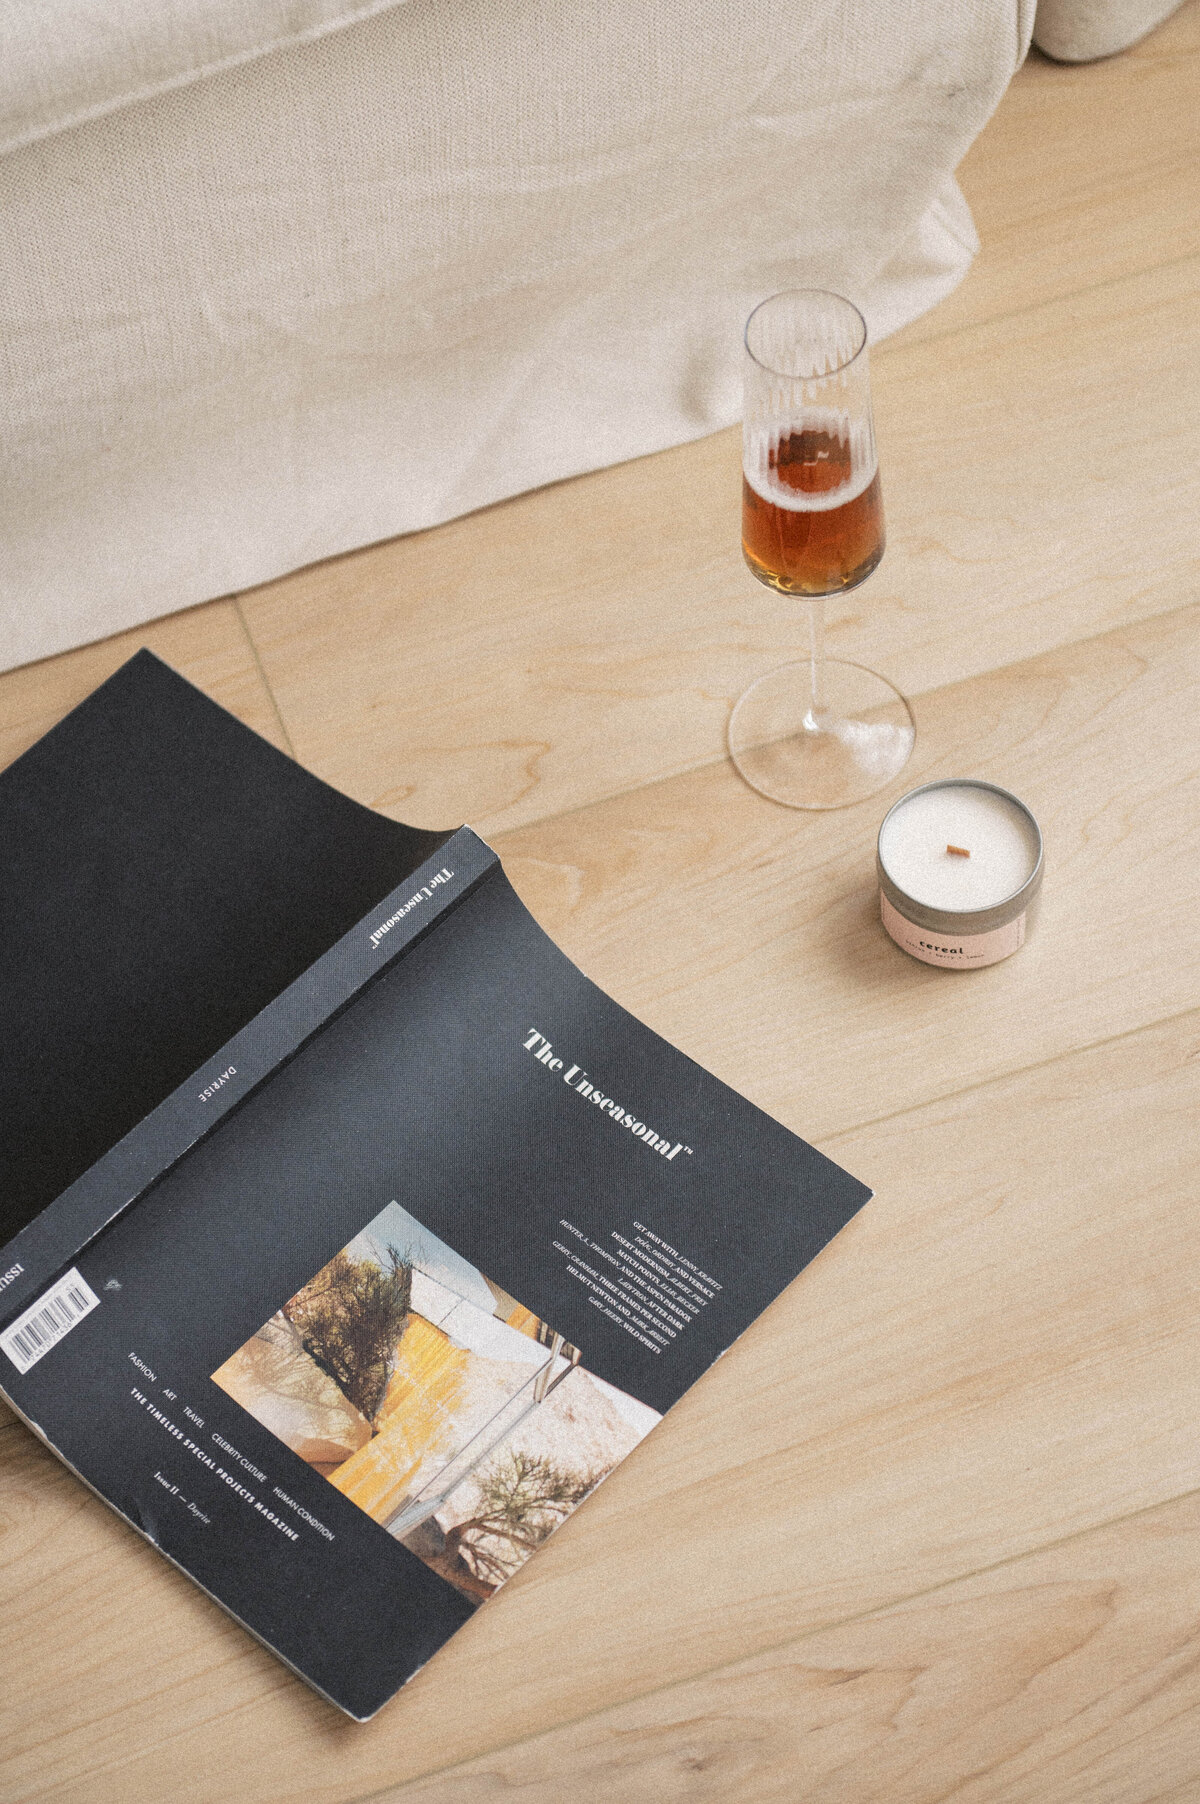 Black magazine art book laying open on the ground next to a candle and glass of wine